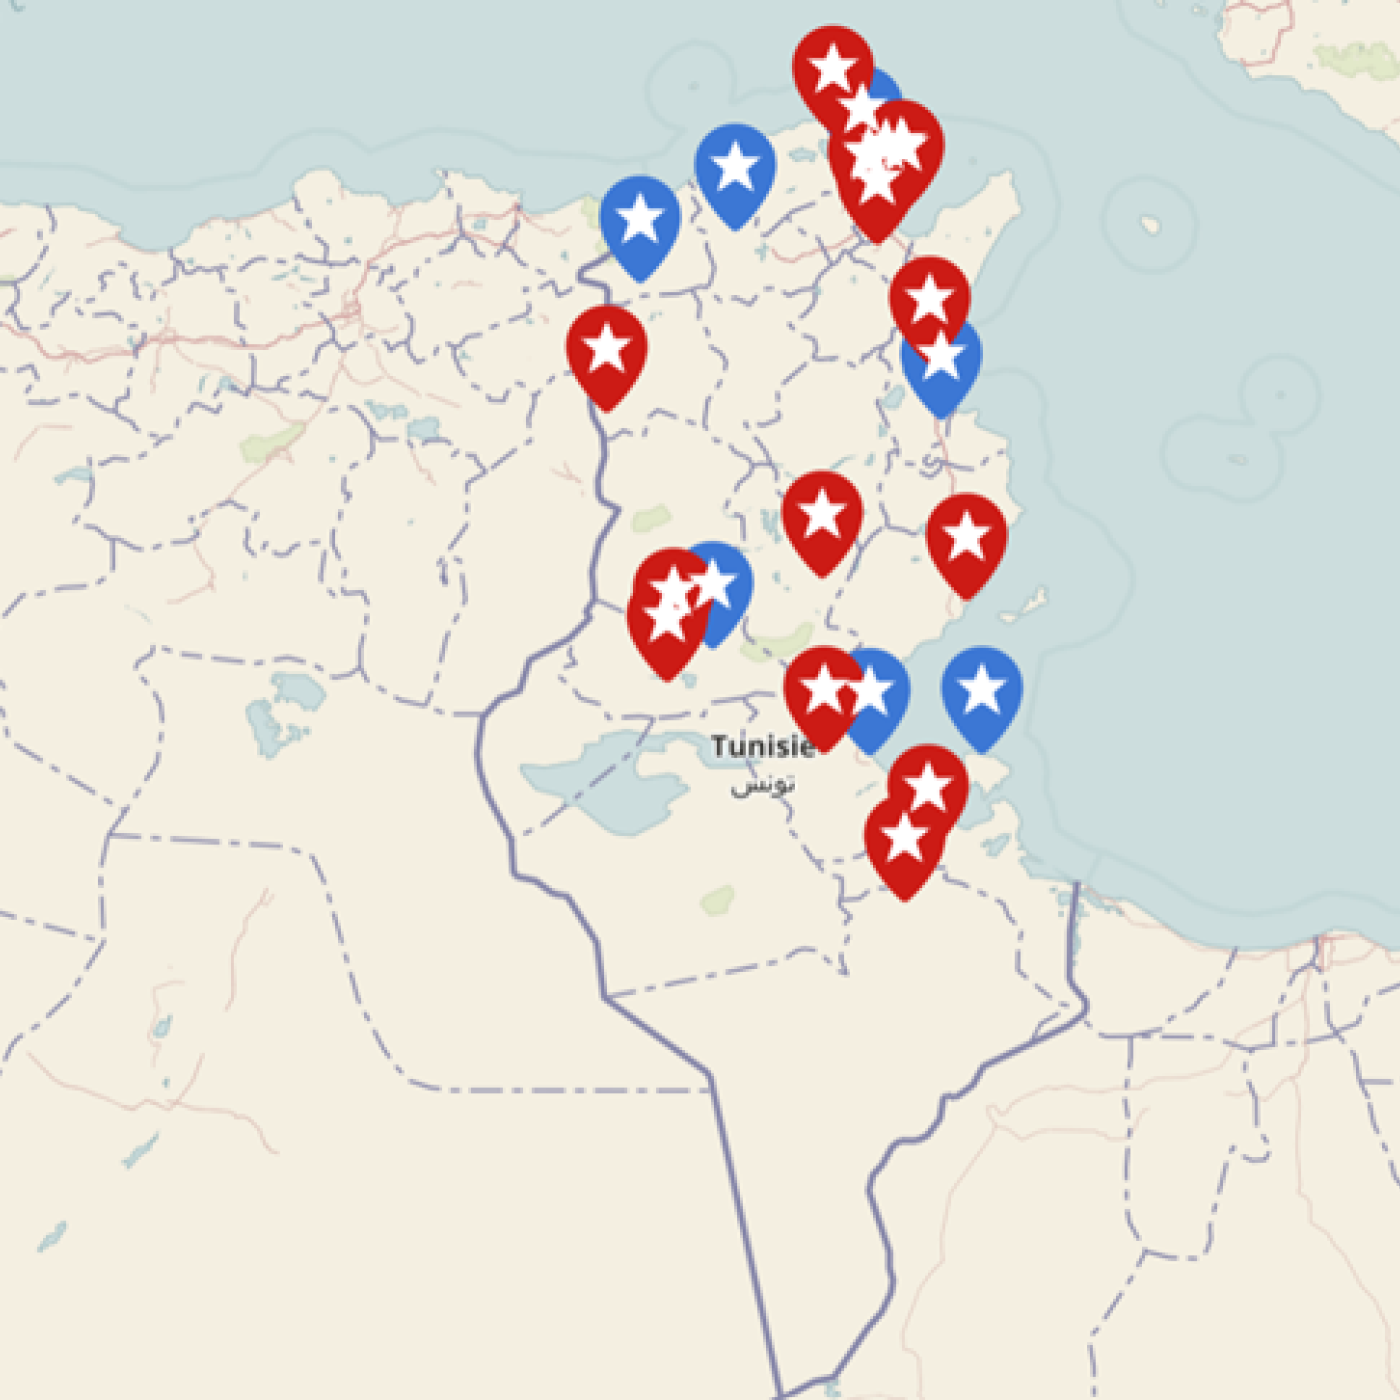 geographic map of Tunisia with location markers